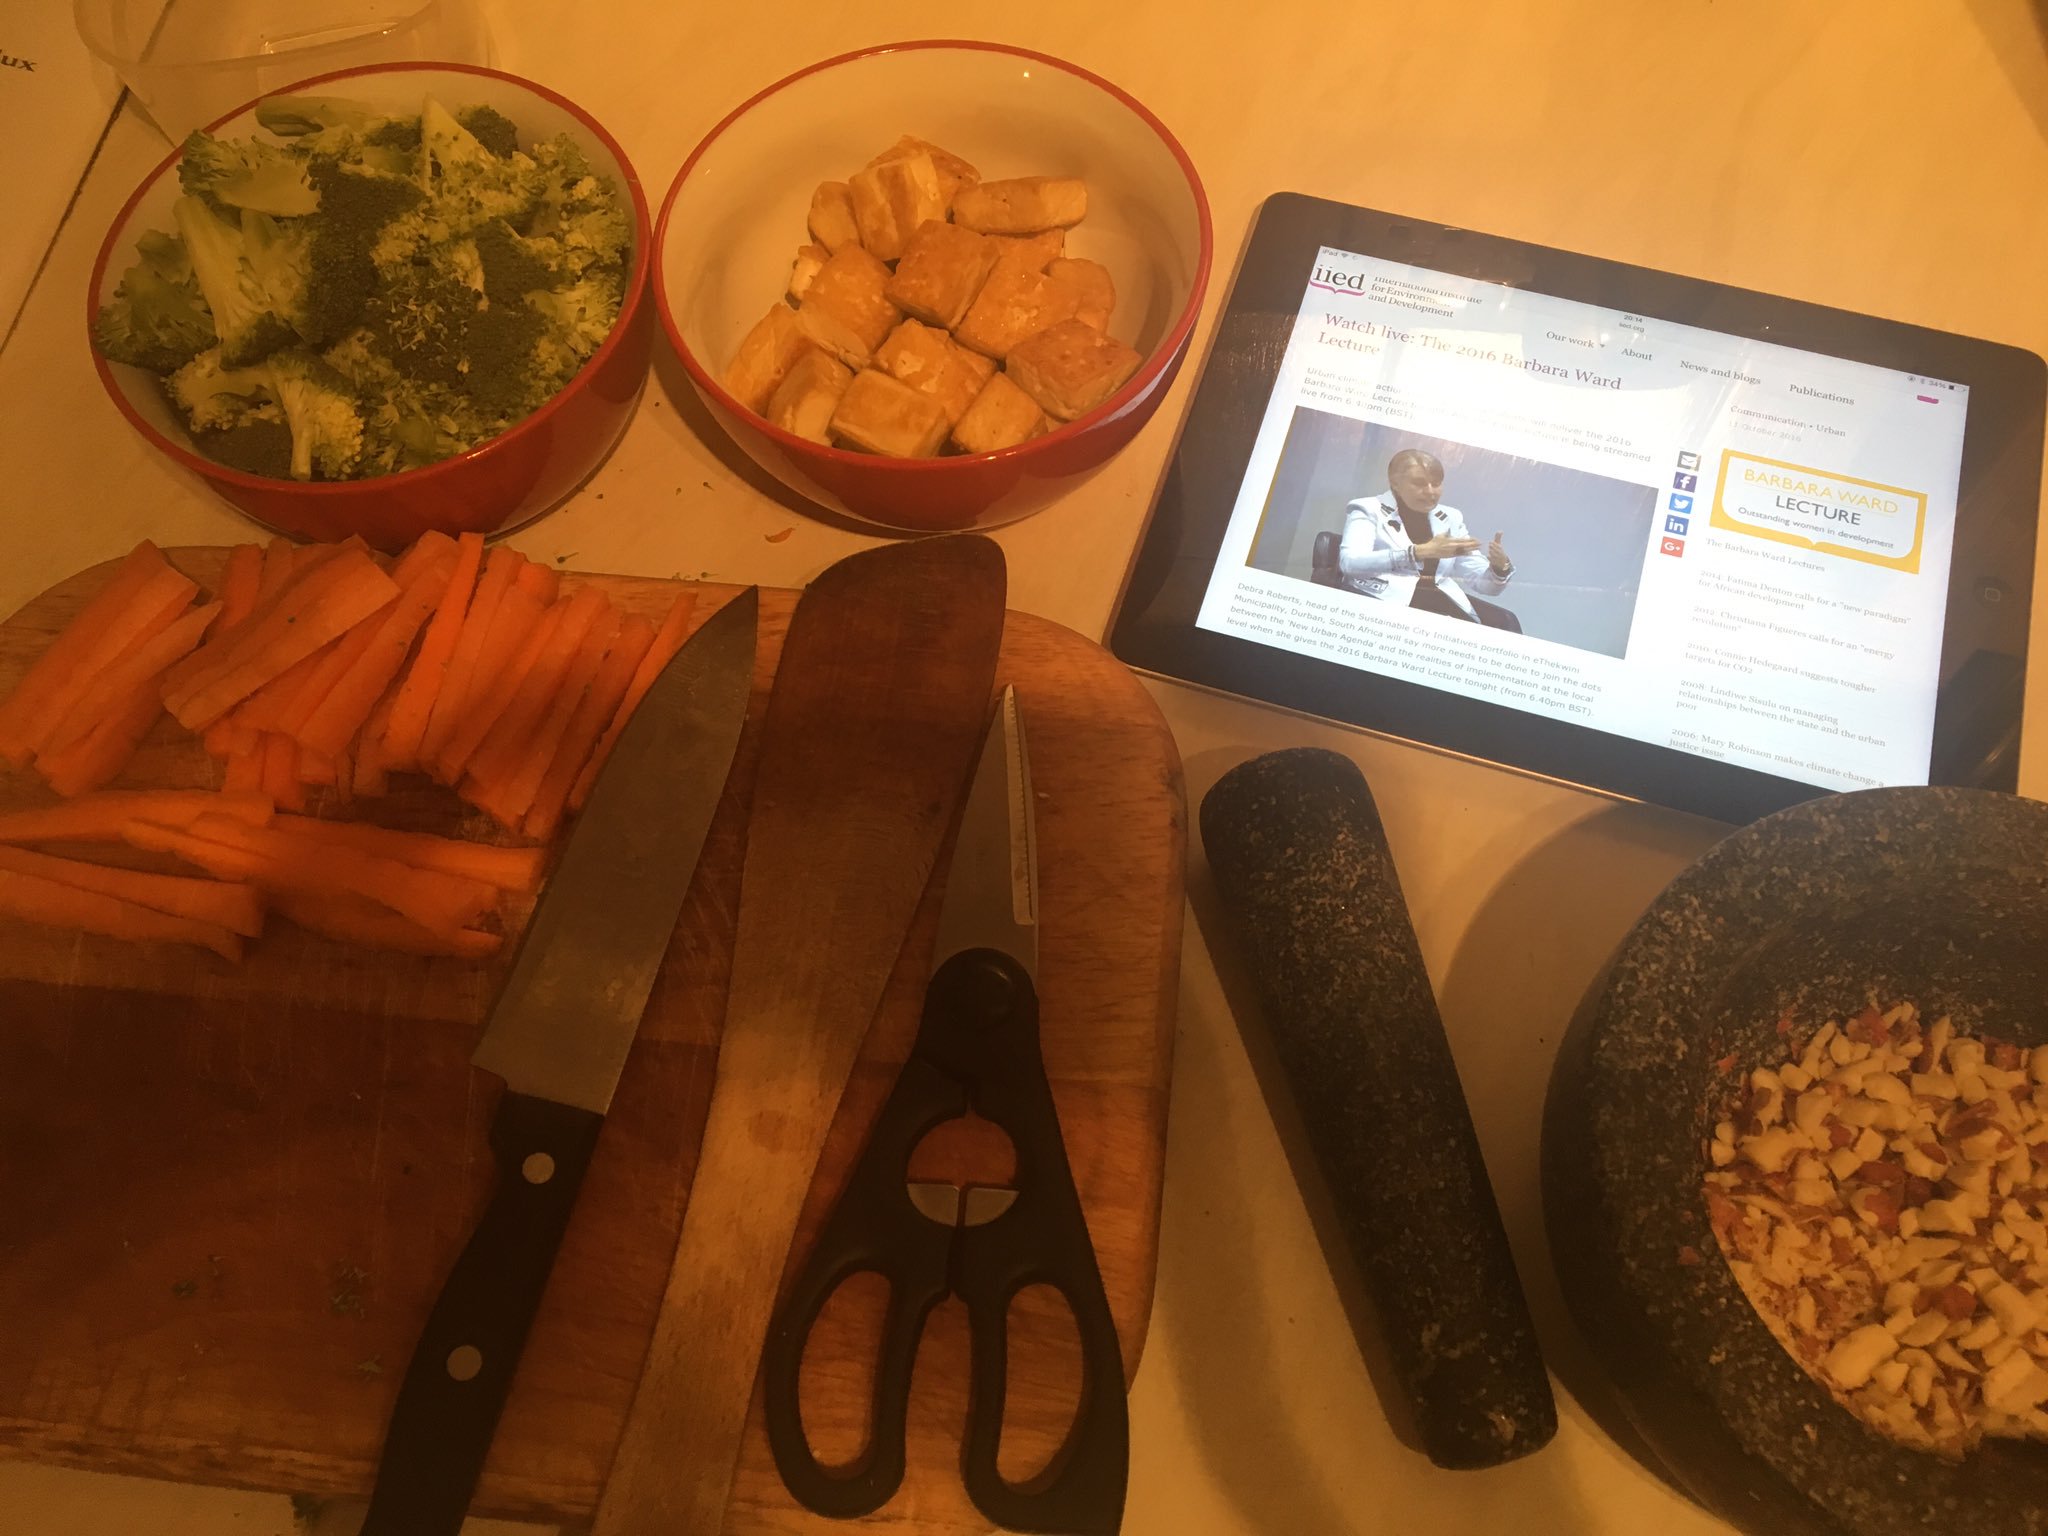 Thanks for streaming #BW2016 @IIED. I could watch whilst prepping dinner. Very interesting talk by Debra Roberts https://t.co/kQgrrbrM9t